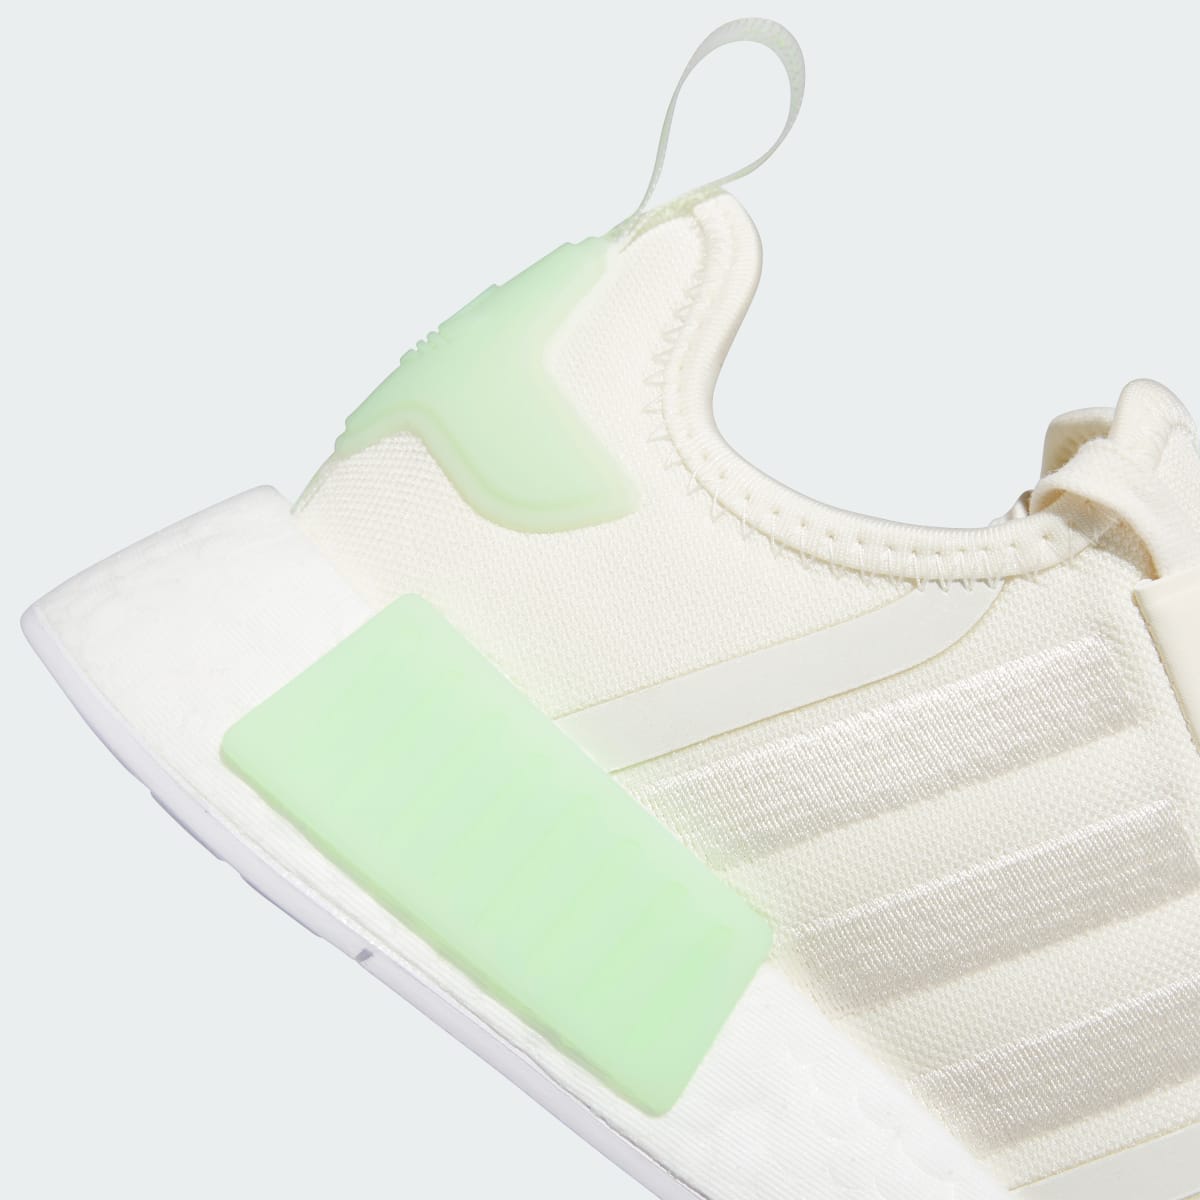 Adidas NMD_R1 Shoes. 11